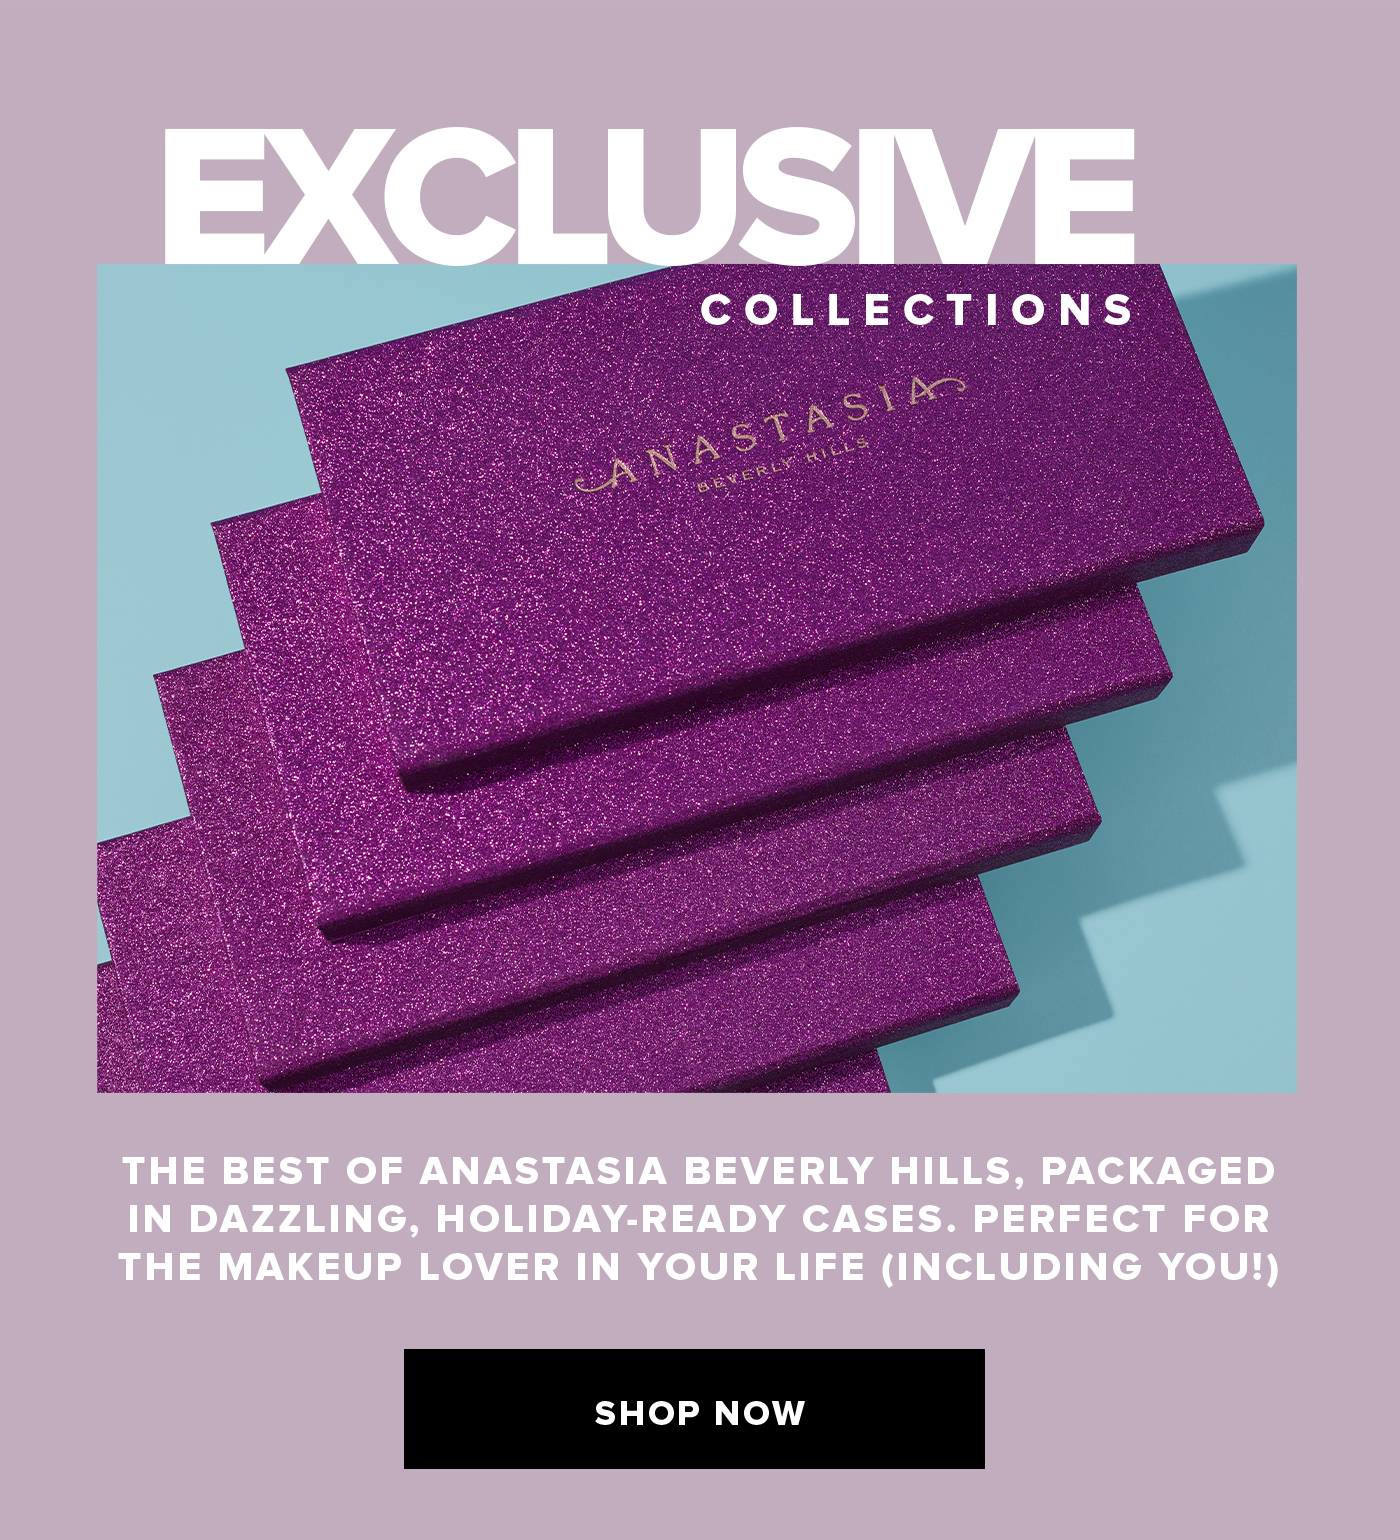 EXCLUSIVE COLLECTONS THE BEST OF ANASTASIA BEVERLY HILLS, PACKAGED IN DAZZLING, HOLIDAY-READY CASES. PERFECT FOR THE MAKEUP LOVER IN YOUR LIFE (INCLUDING YOU!)SHOP NOW